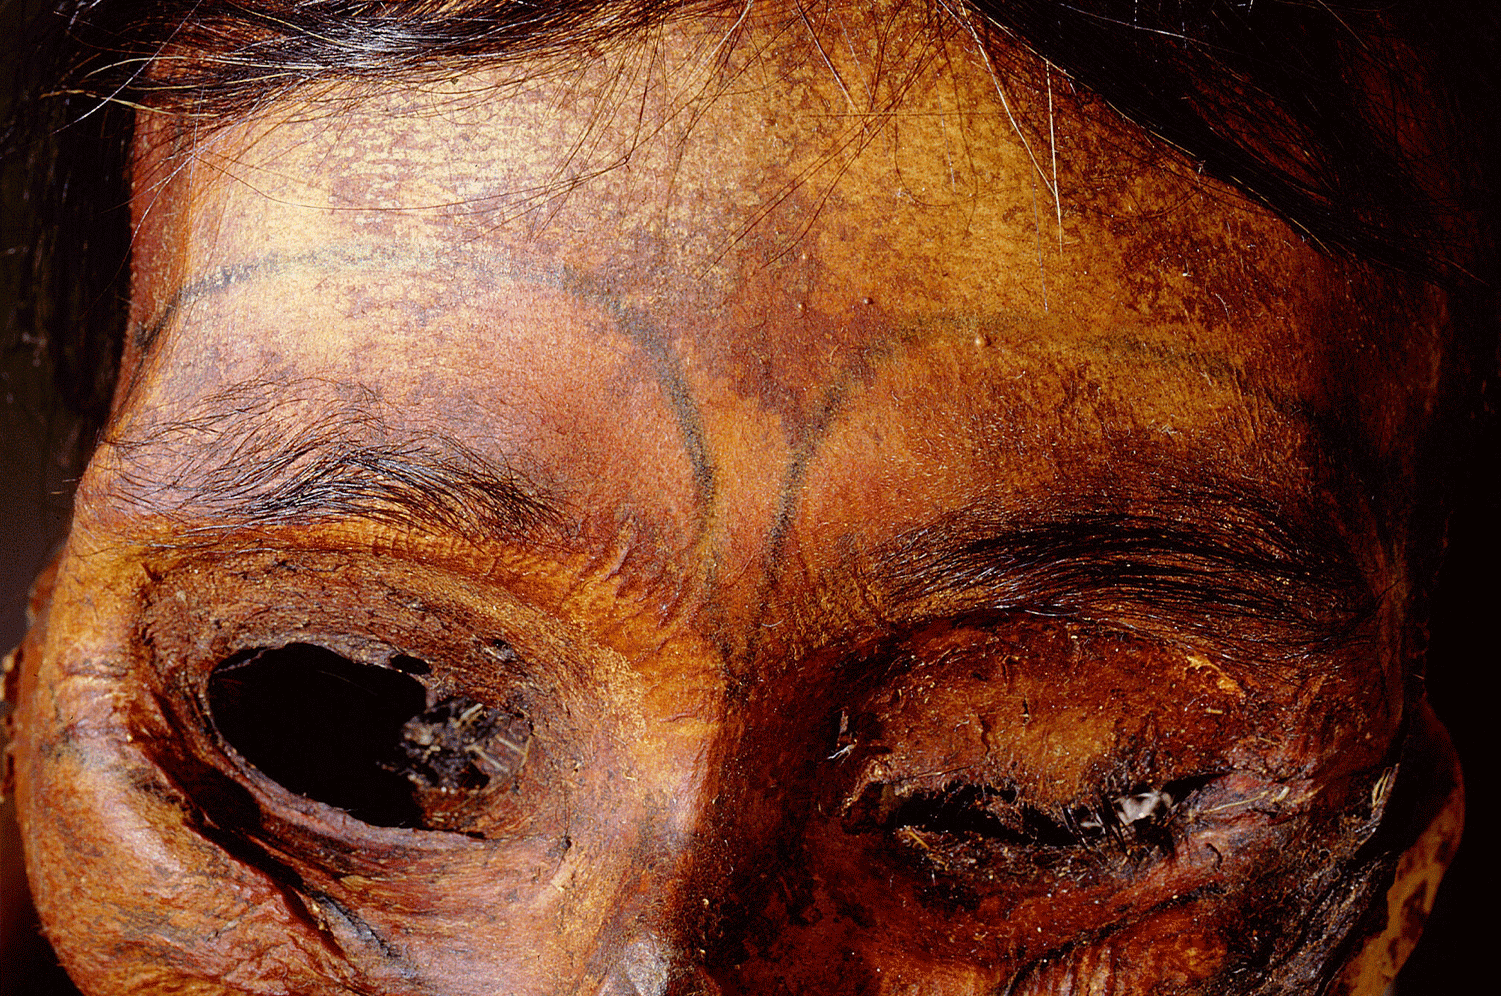 A tattoo still visible on the face of a 15th century Qilakitsoq woman. Credit...Werner Forman Archive/The Greenland Museum via Heritage Images.